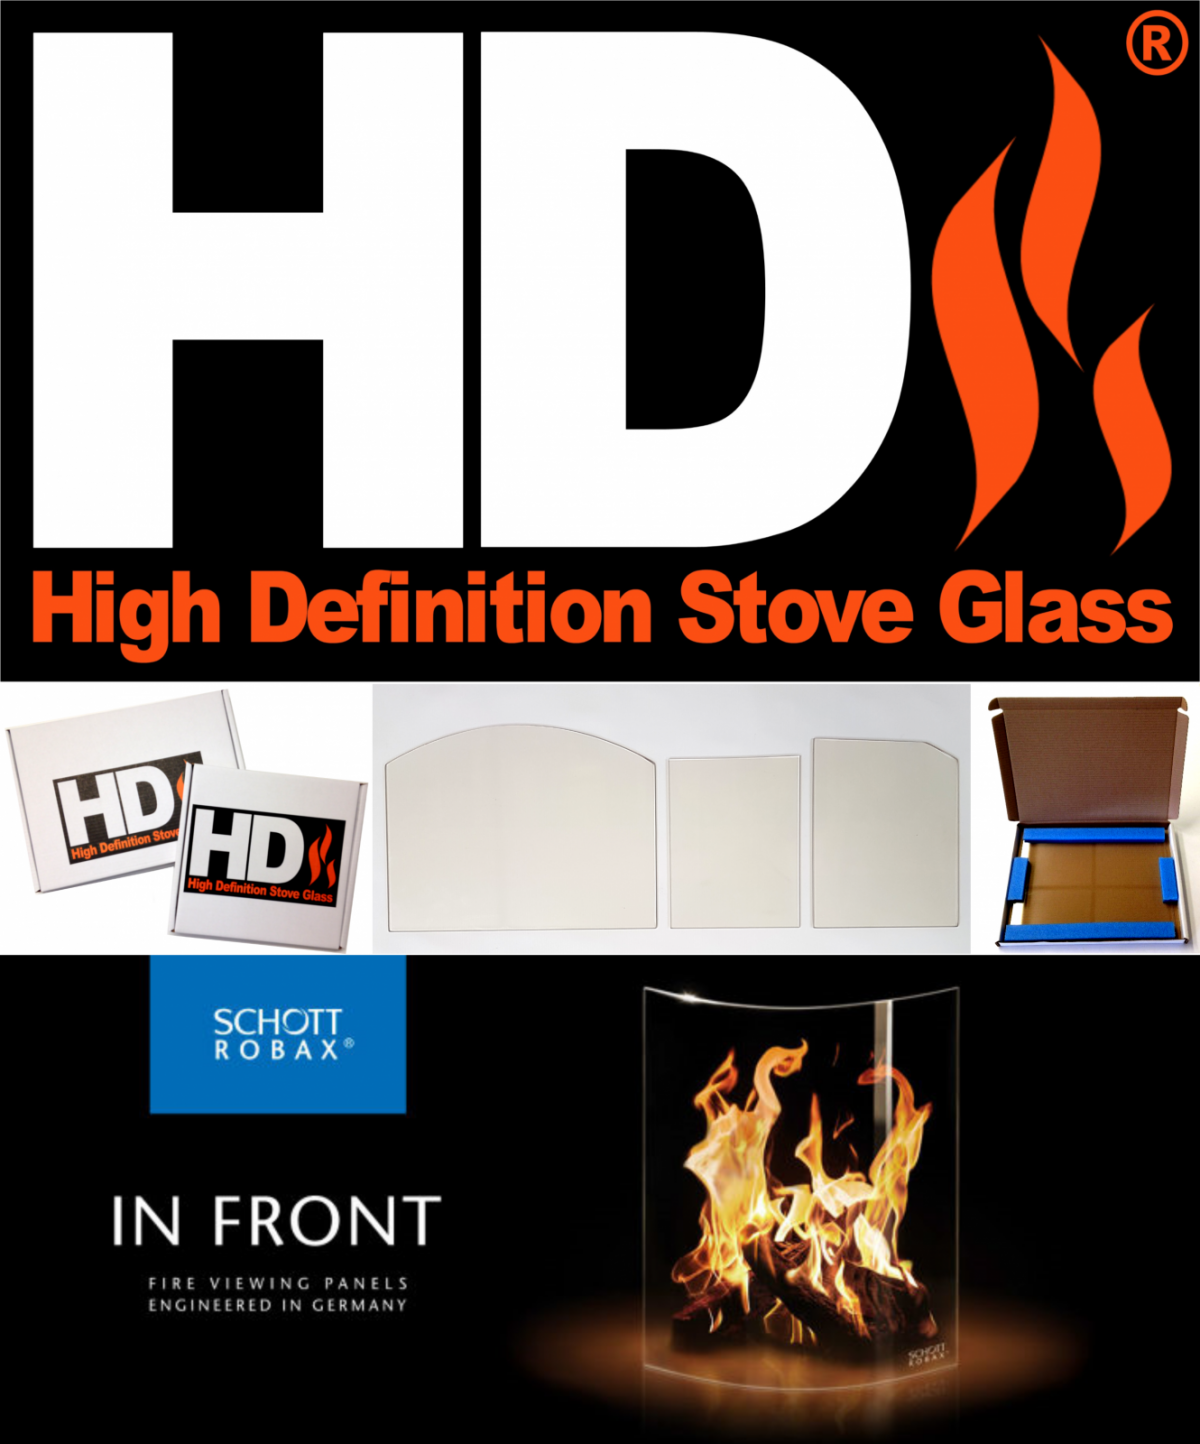 High Definition Stove Glass for the ACR Ashdale